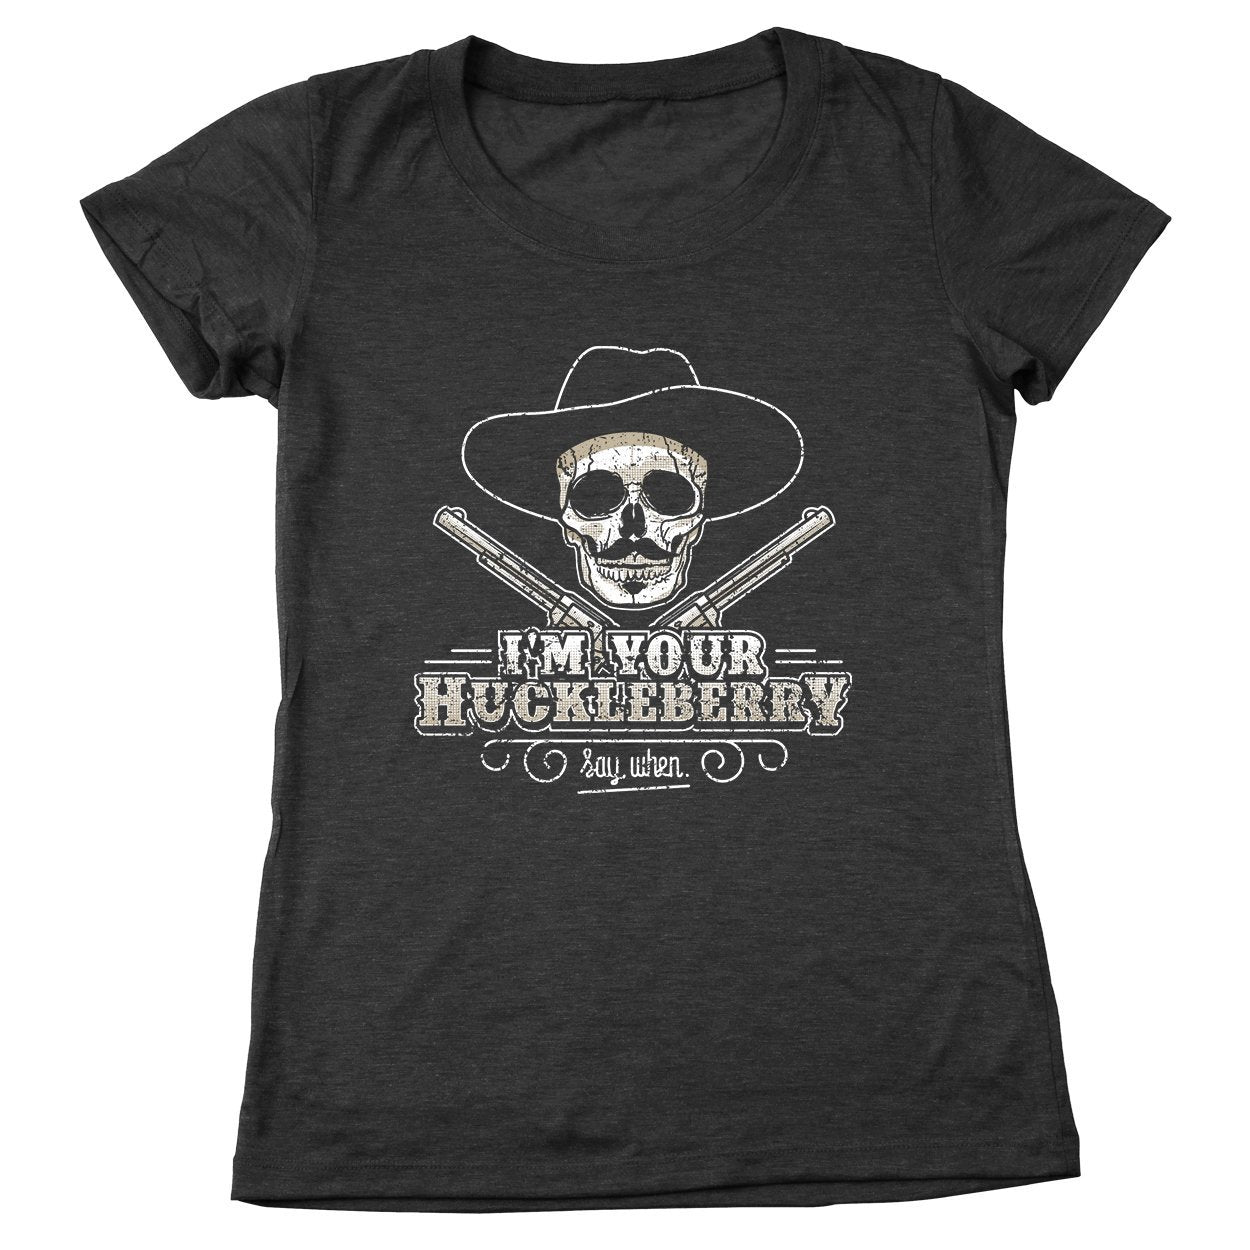 Im Your Huckleberry Women's Relaxed Fit Tri-Blend T-Shirt